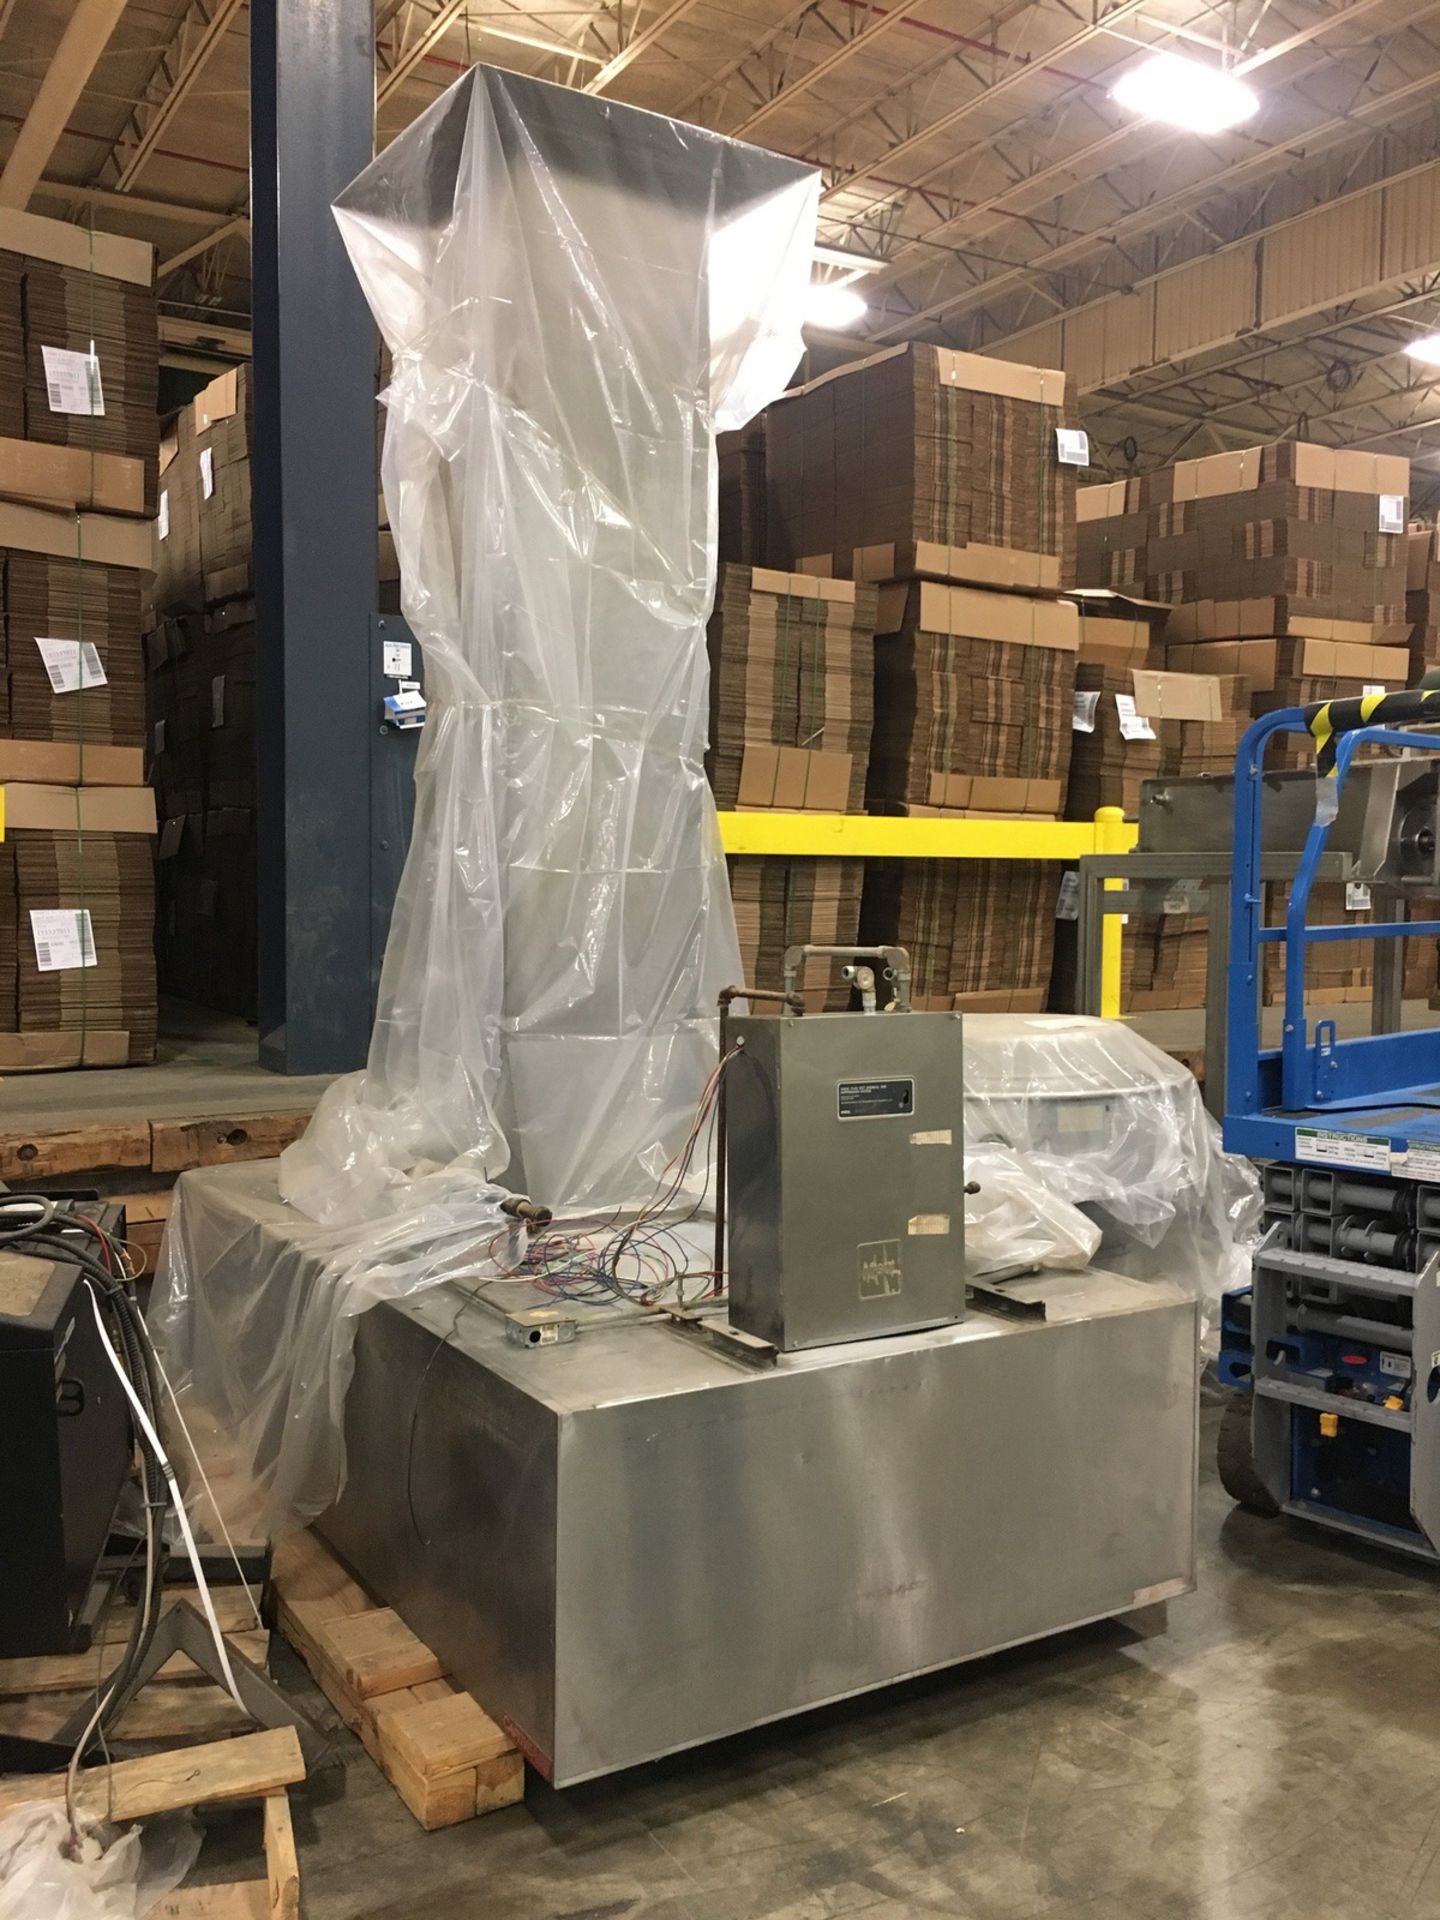 Belshaw C200G Fryer, Suppression Hood, Ansul Suppression System, Natur | Insp by Appt | Rig Fee: 300 - Image 10 of 12